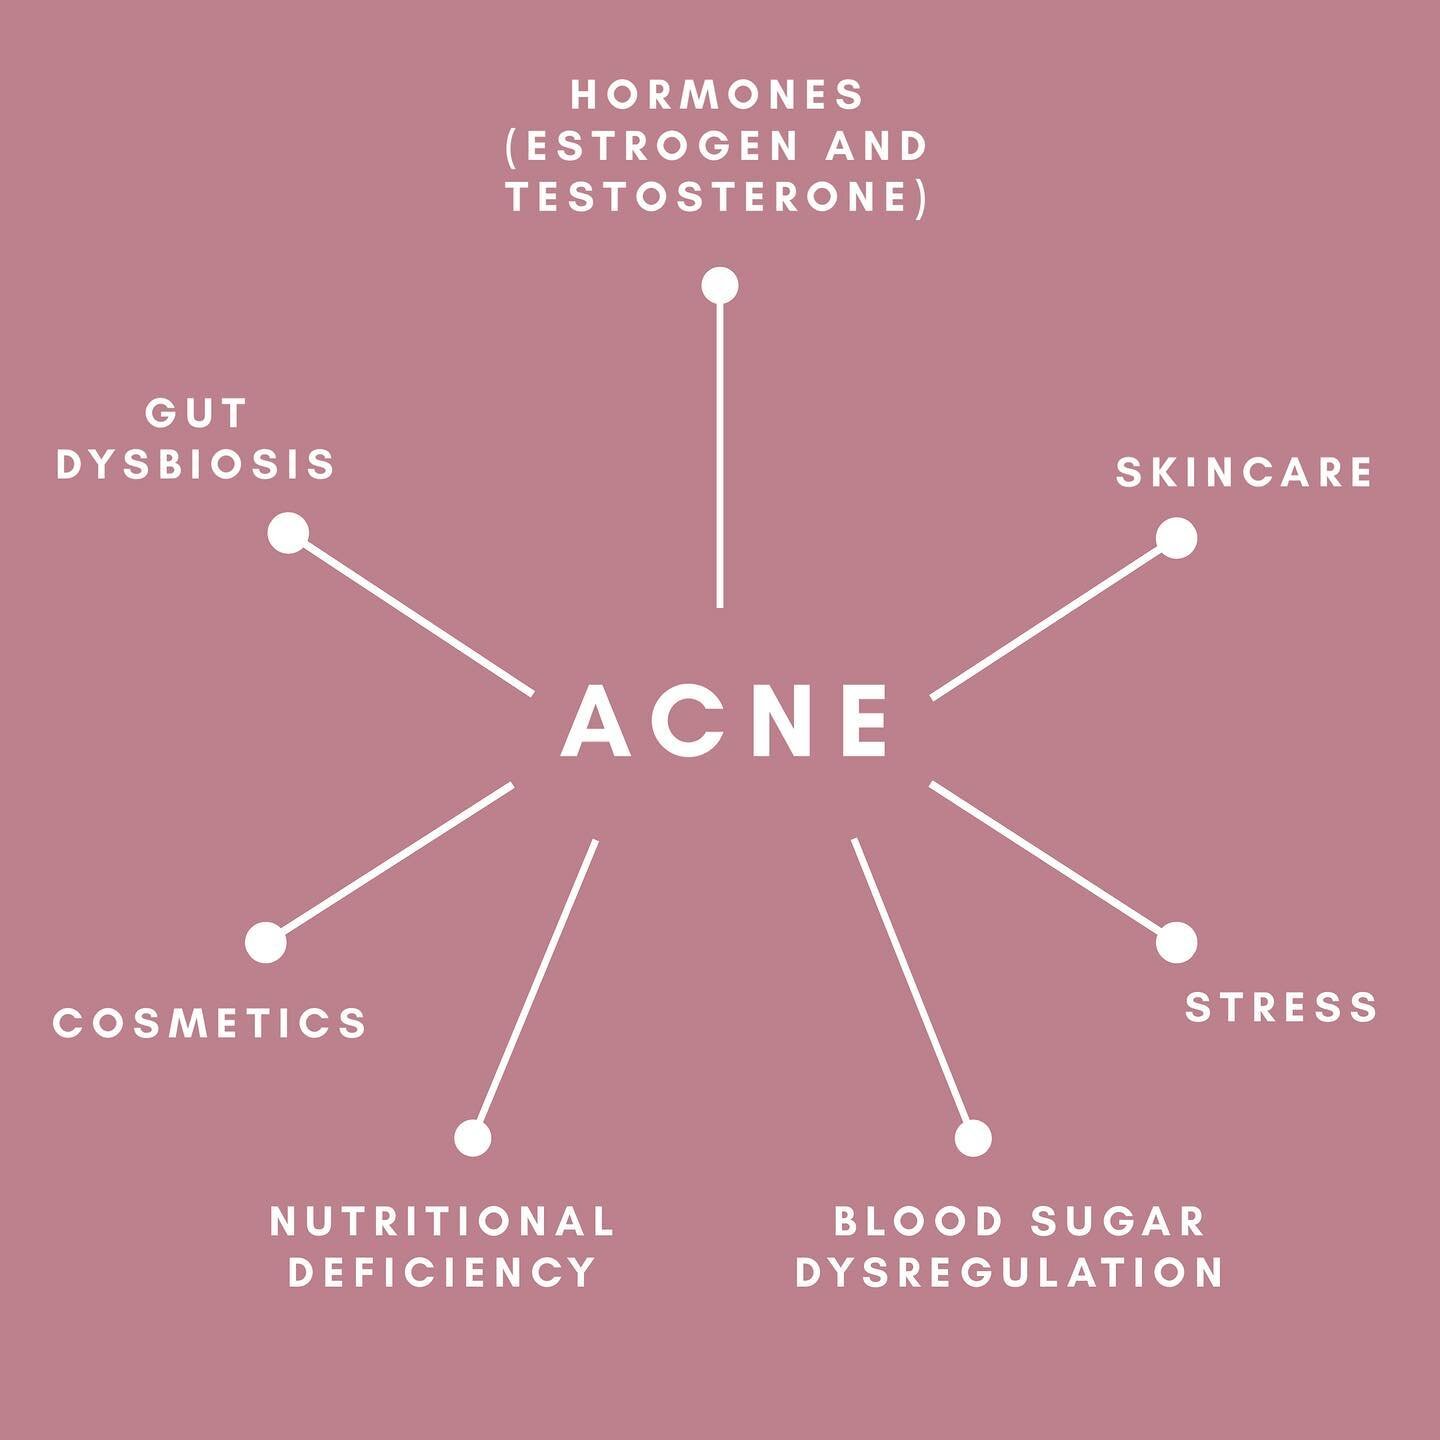 How is your skin?

If you&rsquo;re breaking out, here are some things to think about. These are usually the things running through my head when I work with acne. If you think something here applies to you, start there, and work on that.

Ages ago, a 